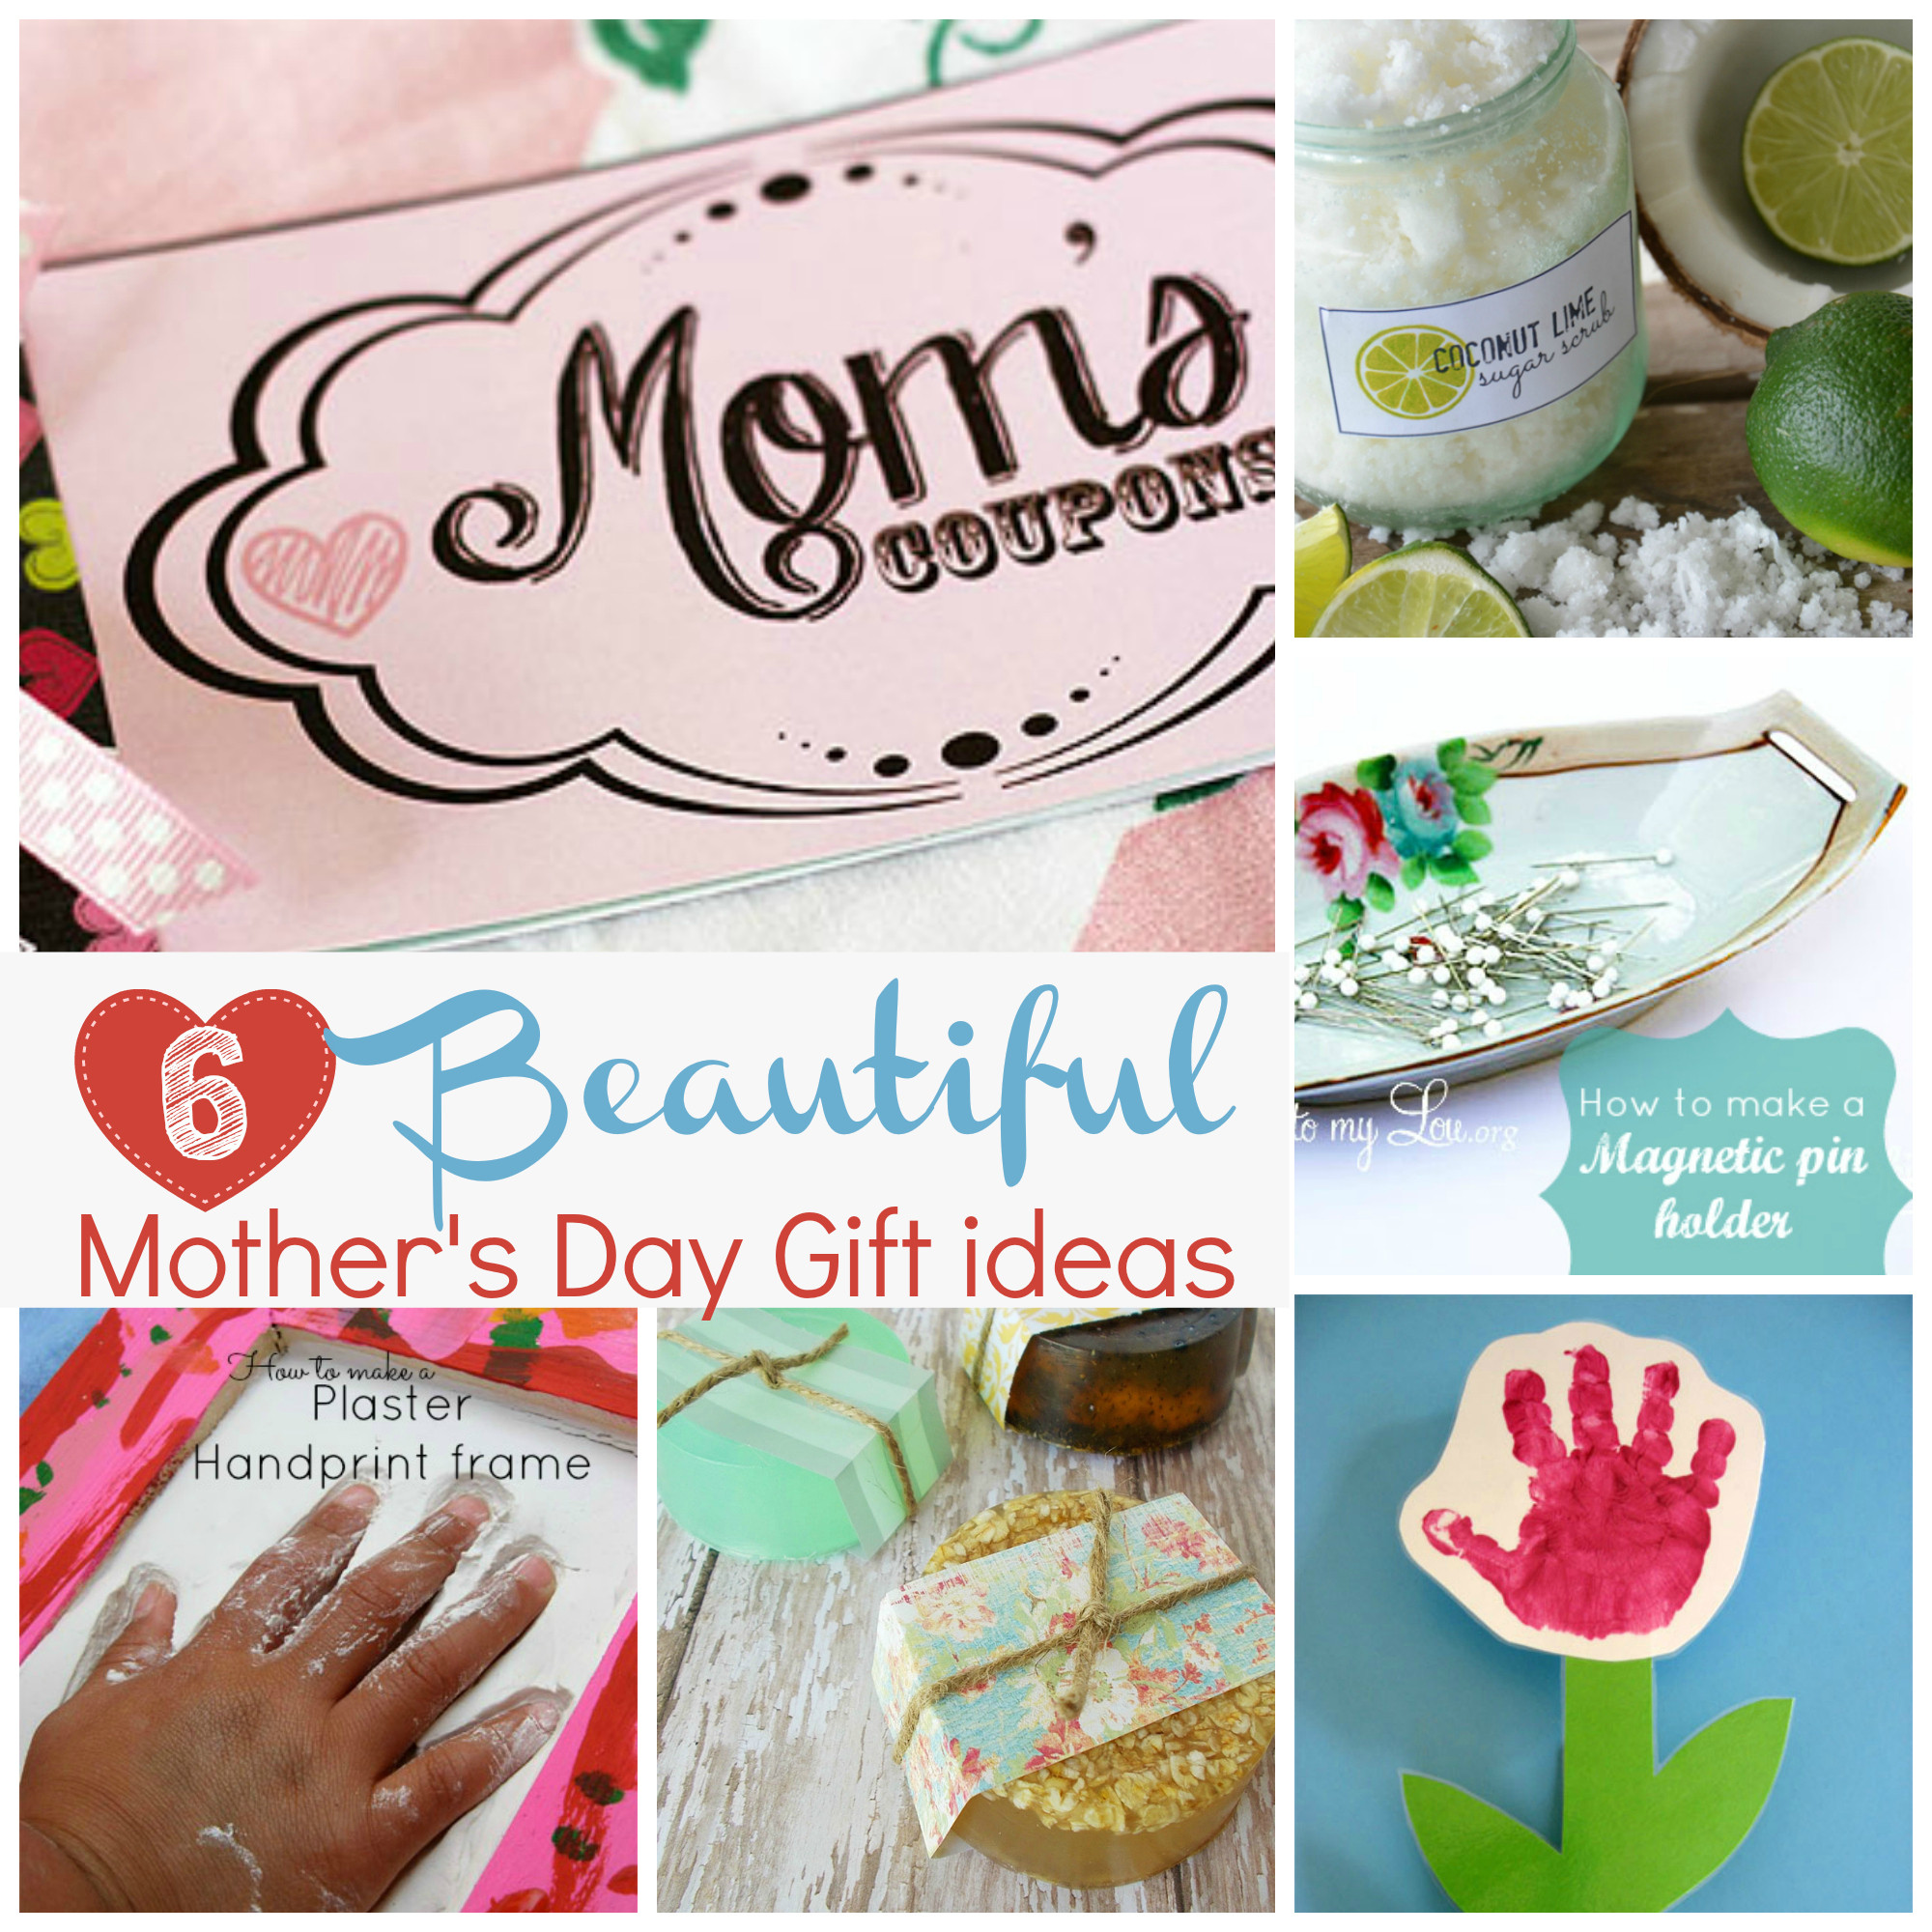 Mothers Day Gift Ideads
 Handmade t ideas for Mother s Day